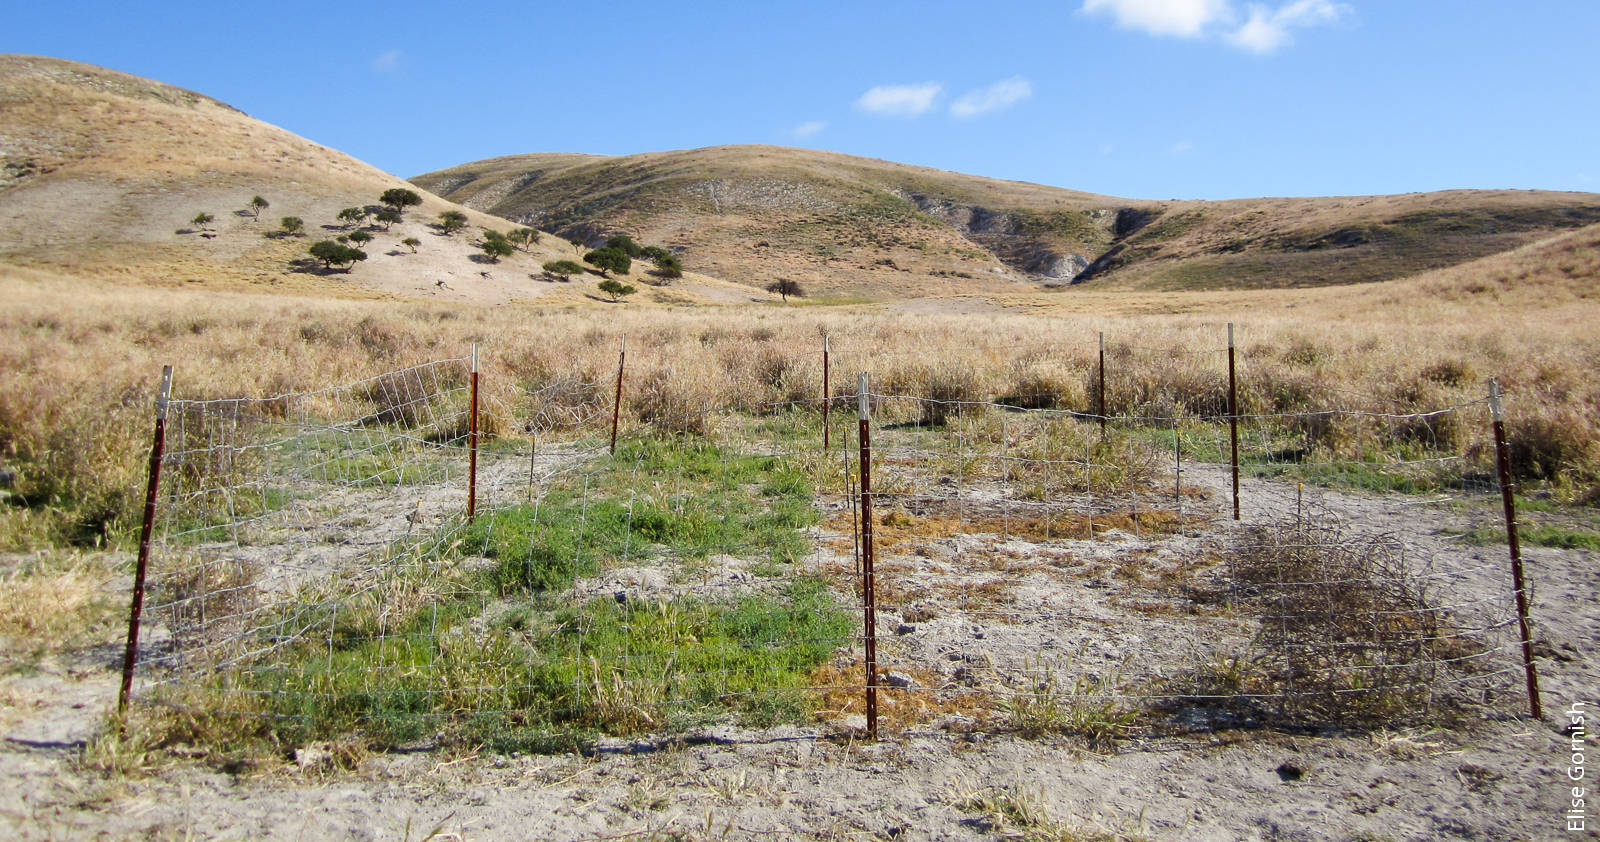 An in-progress restoration project in which UC Davis researchers sprayed half of the plots to reduce invasive Russian thistle (tumbleweed).